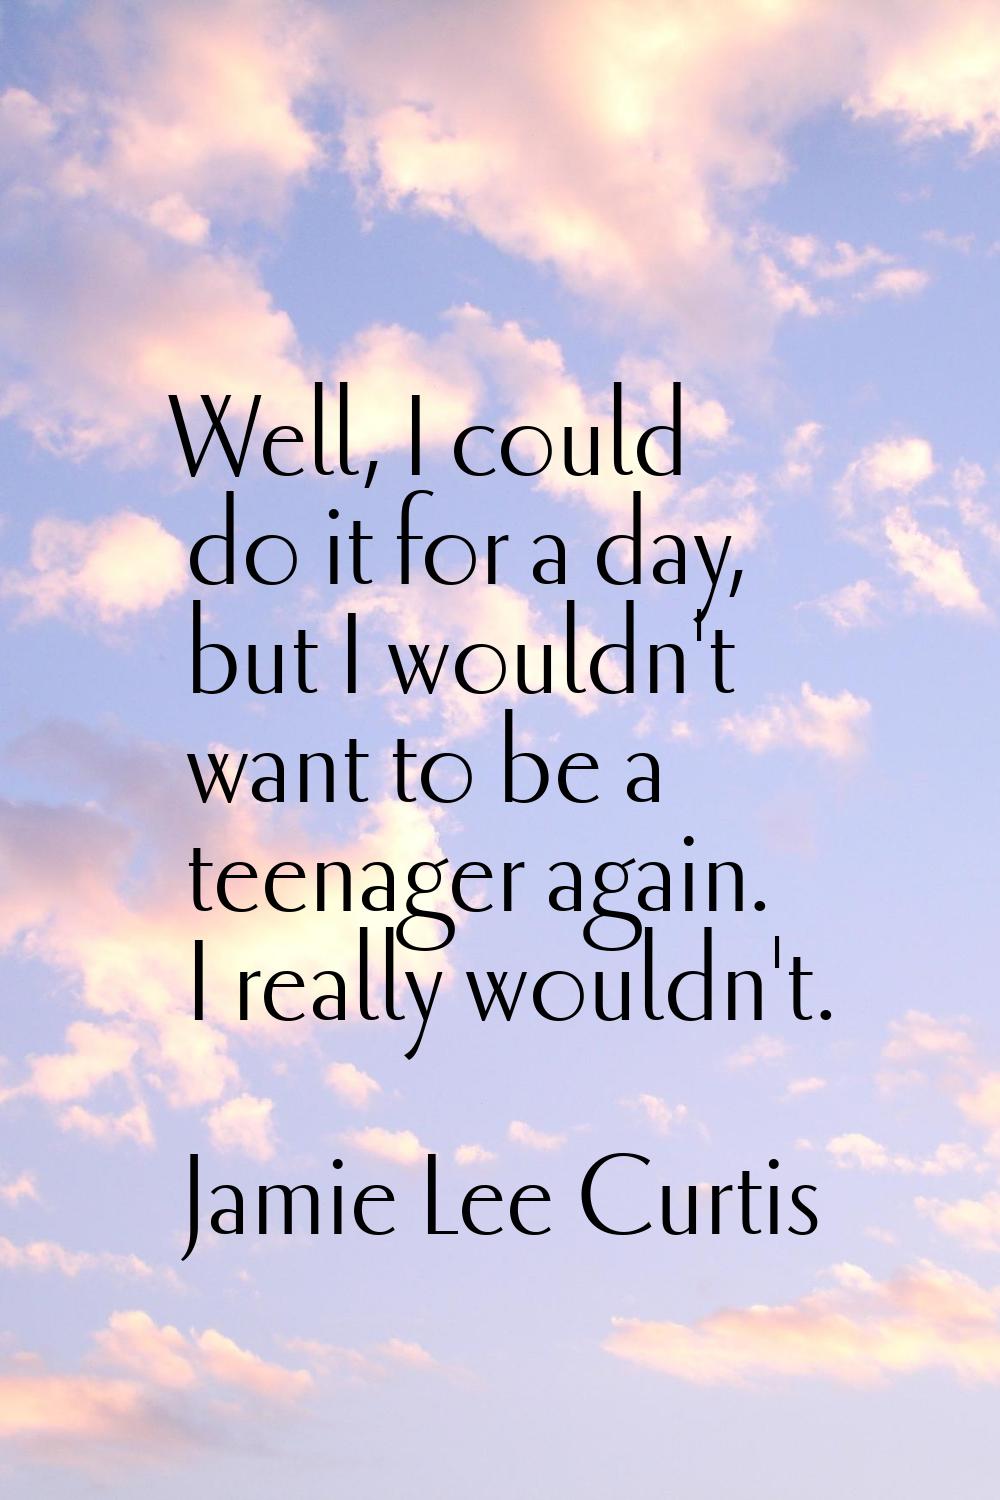 Well, I could do it for a day, but I wouldn't want to be a teenager again. I really wouldn't.